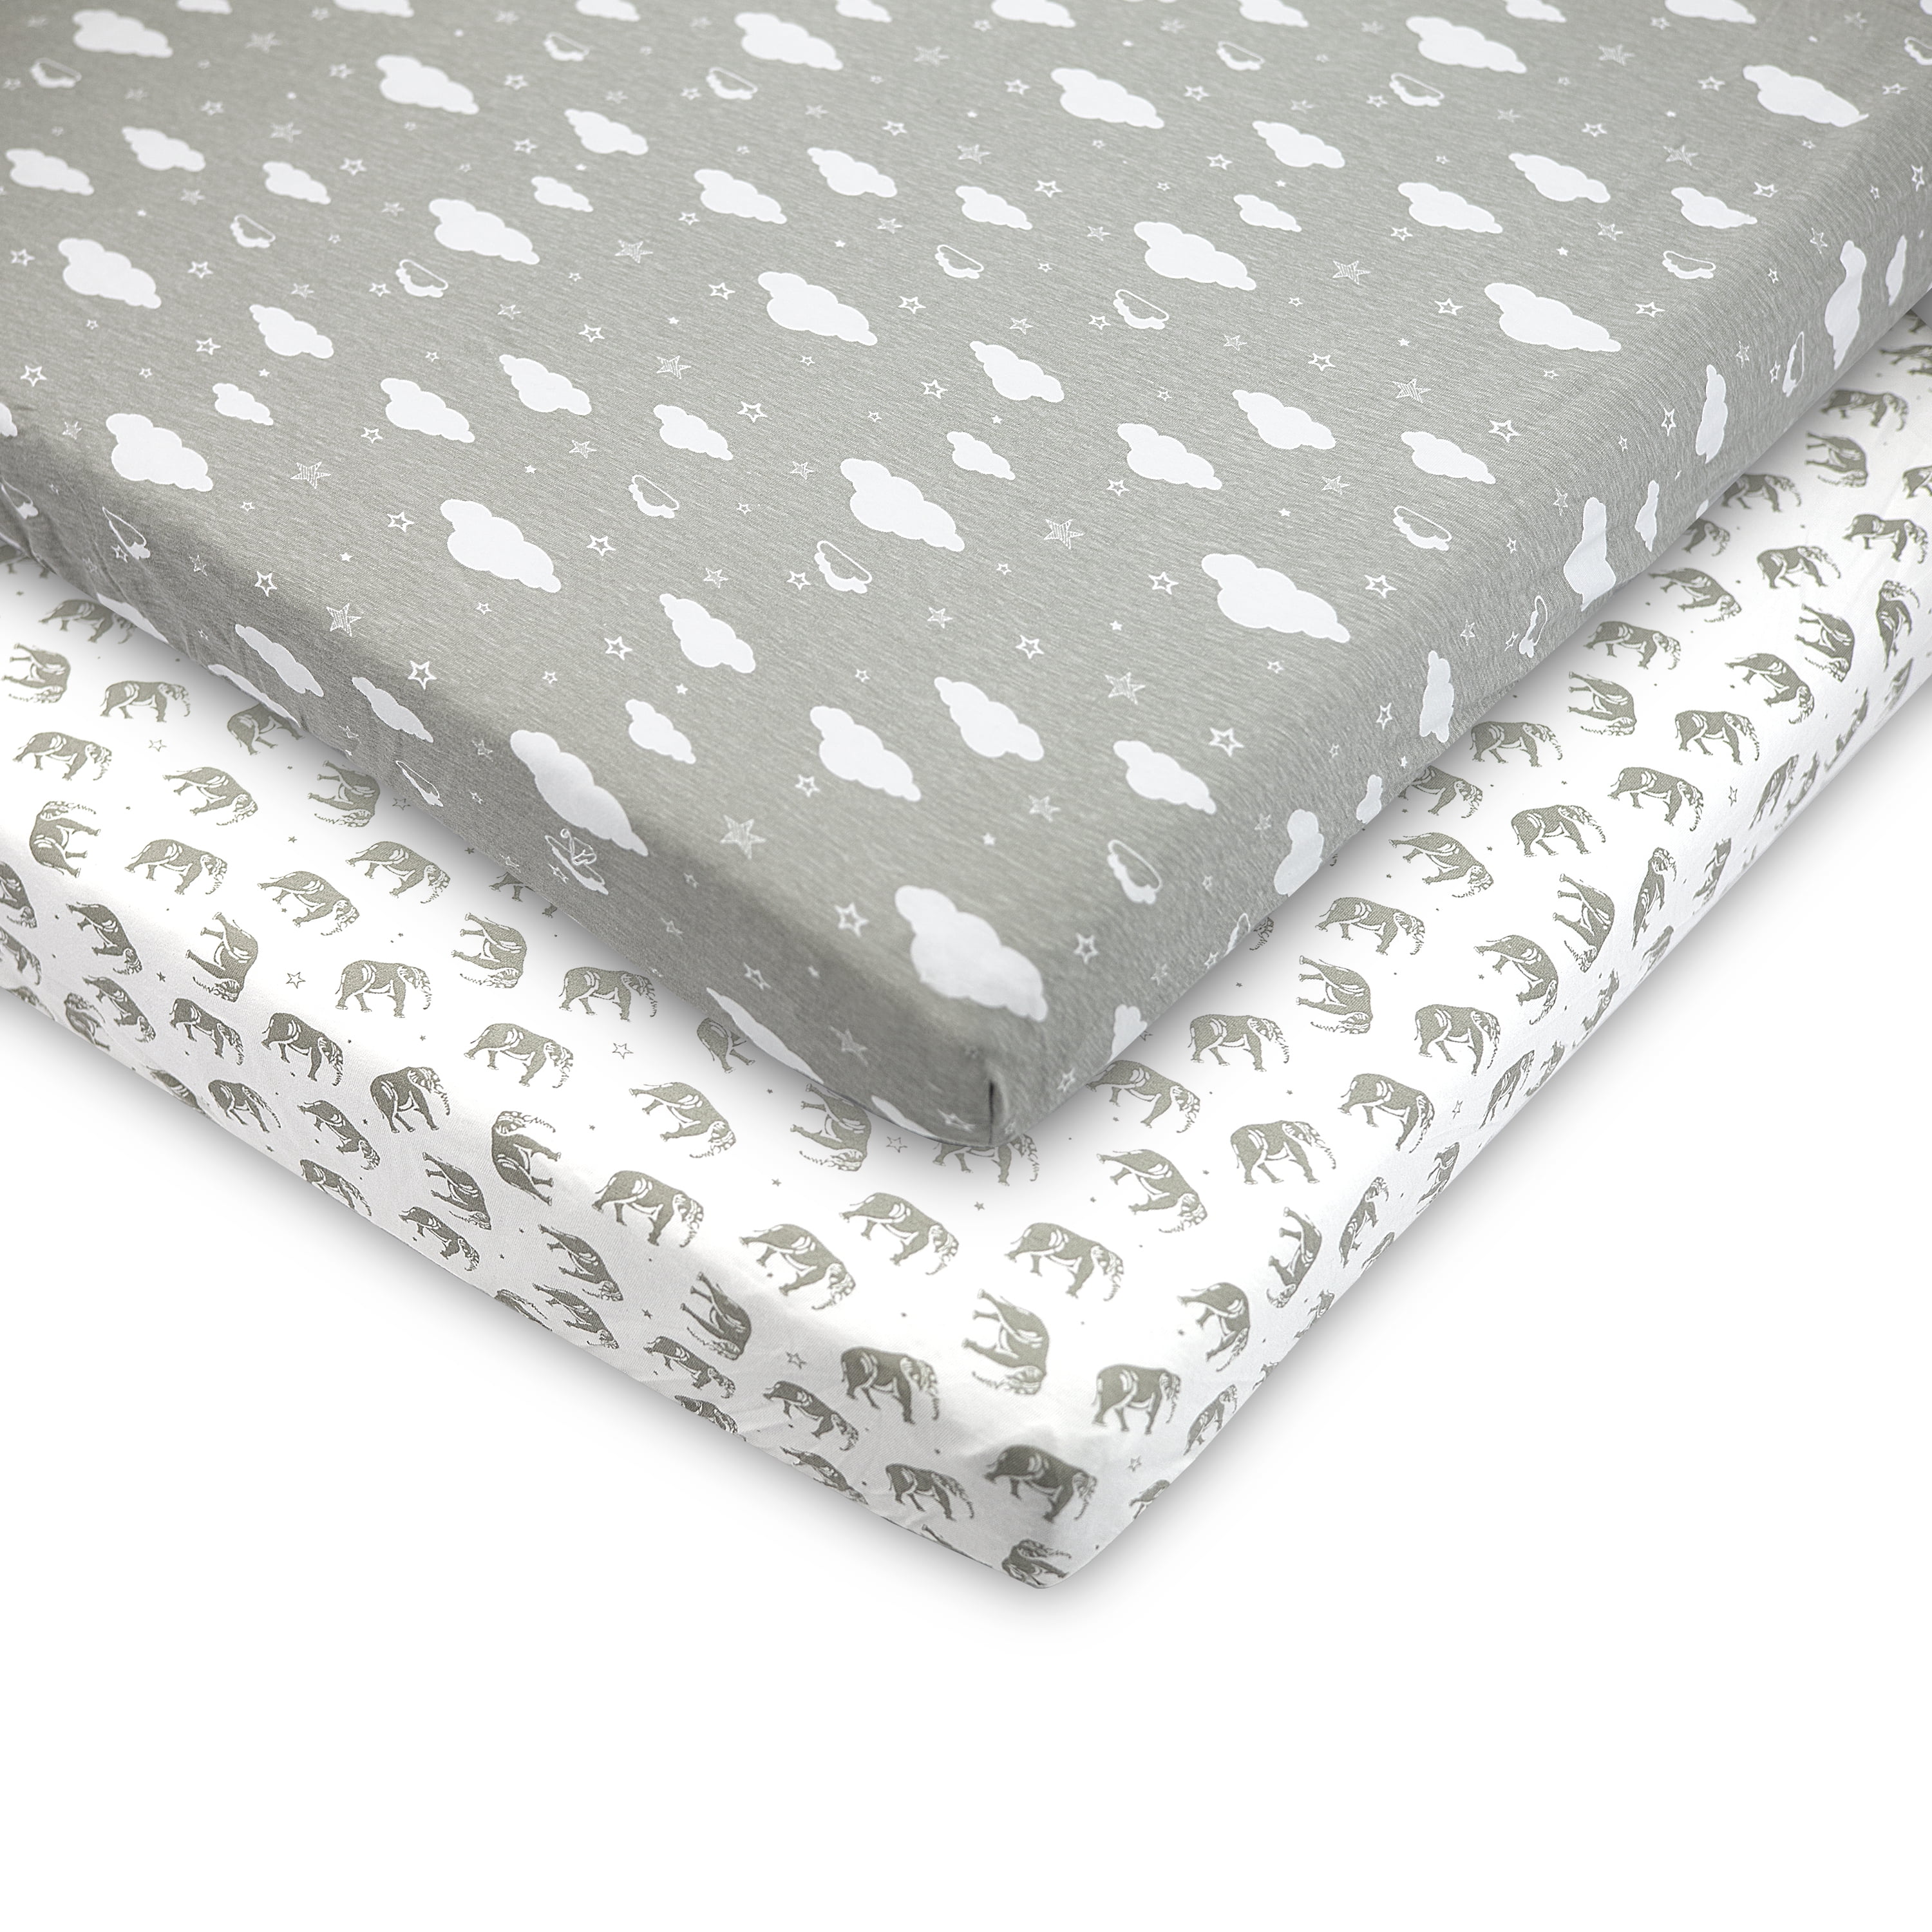 Gray/White Unisex 2 Pack 100% Organic Cotton Sheets for Pack n Play and Other Portable/Mini Cribs Playard or up to 3 Mattress 